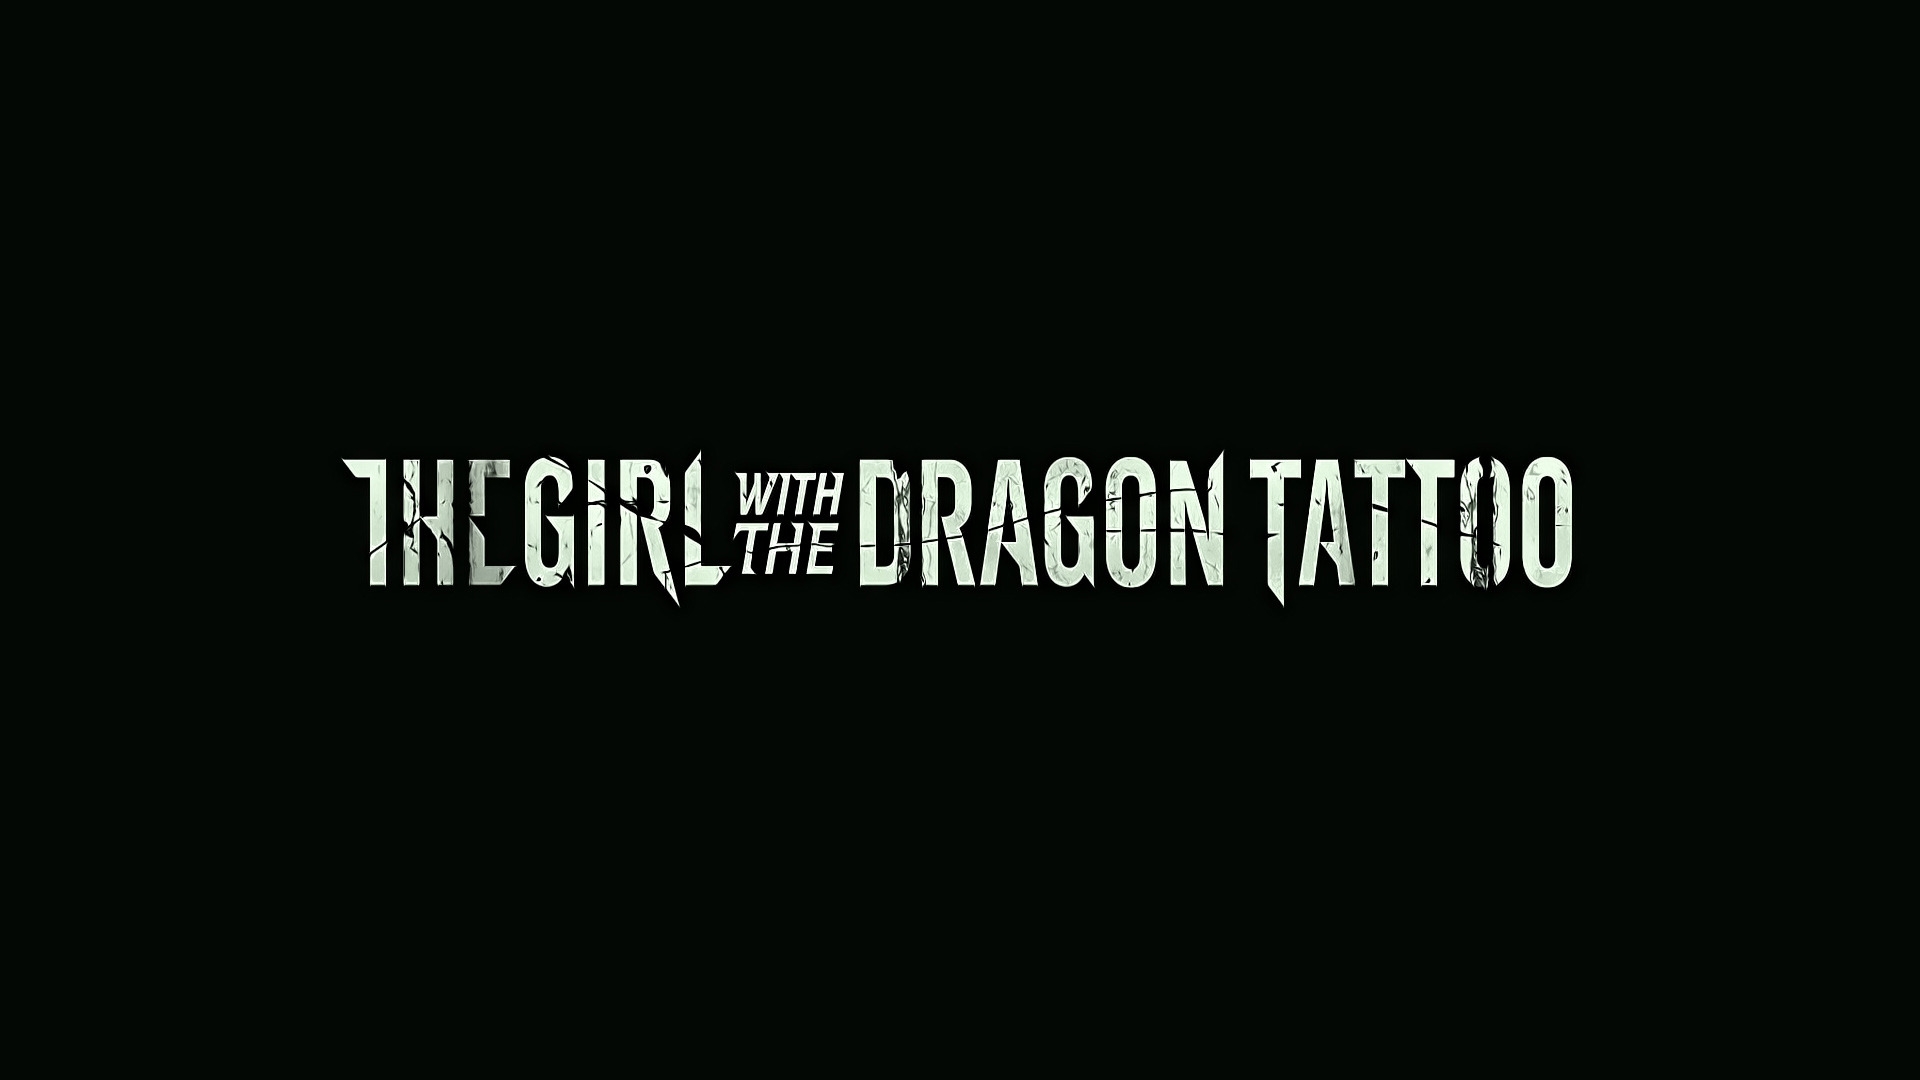 The Girl with the Dragon Tattoo for 1920 x 1080 HDTV 1080p resolution